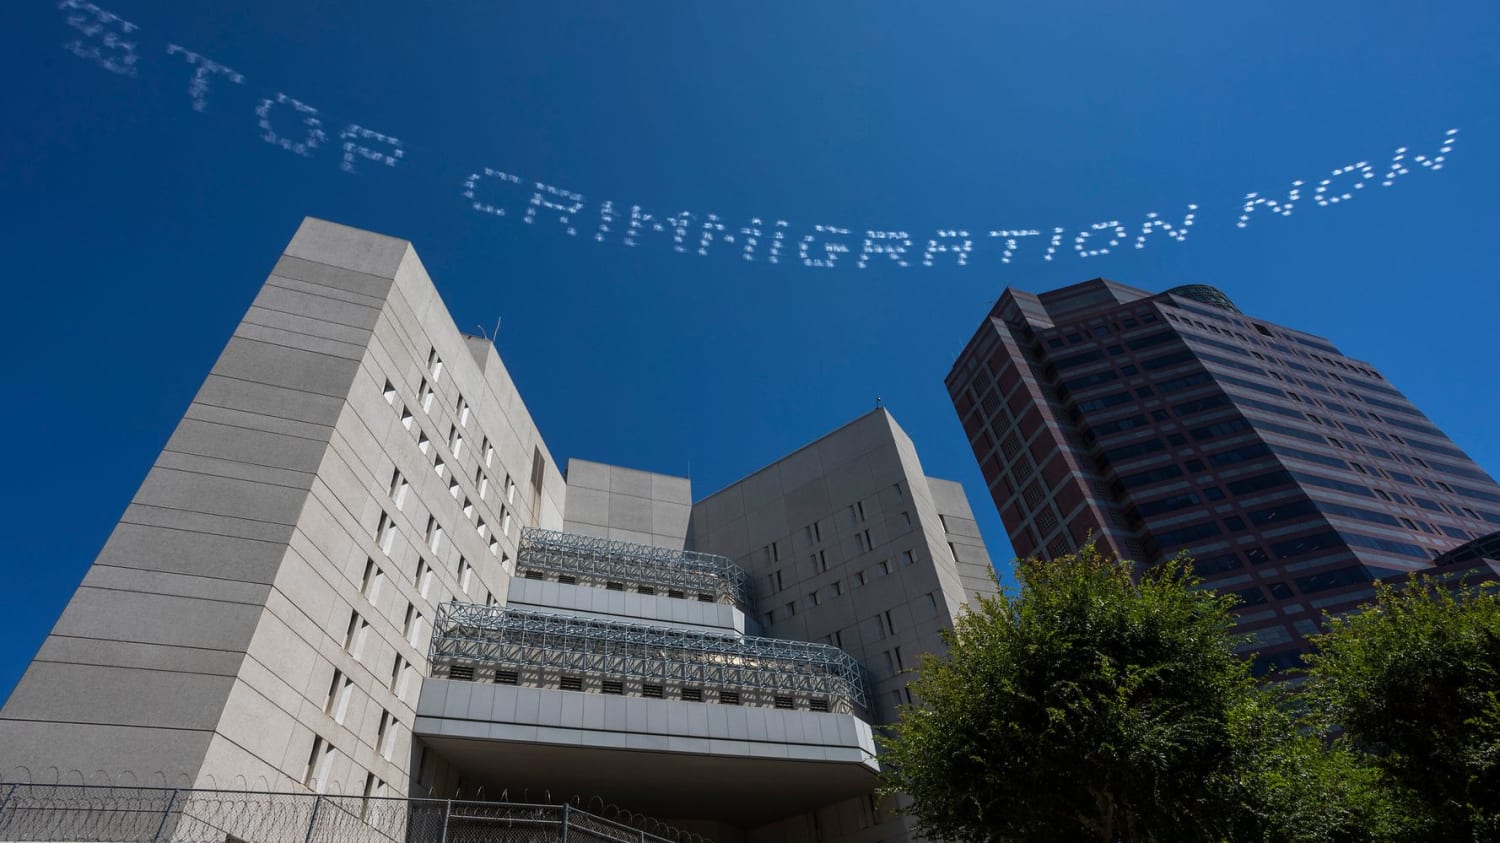 Artists Enlist Skywriting Planes To Expose The ICE Detention Crisis In Our Backyards